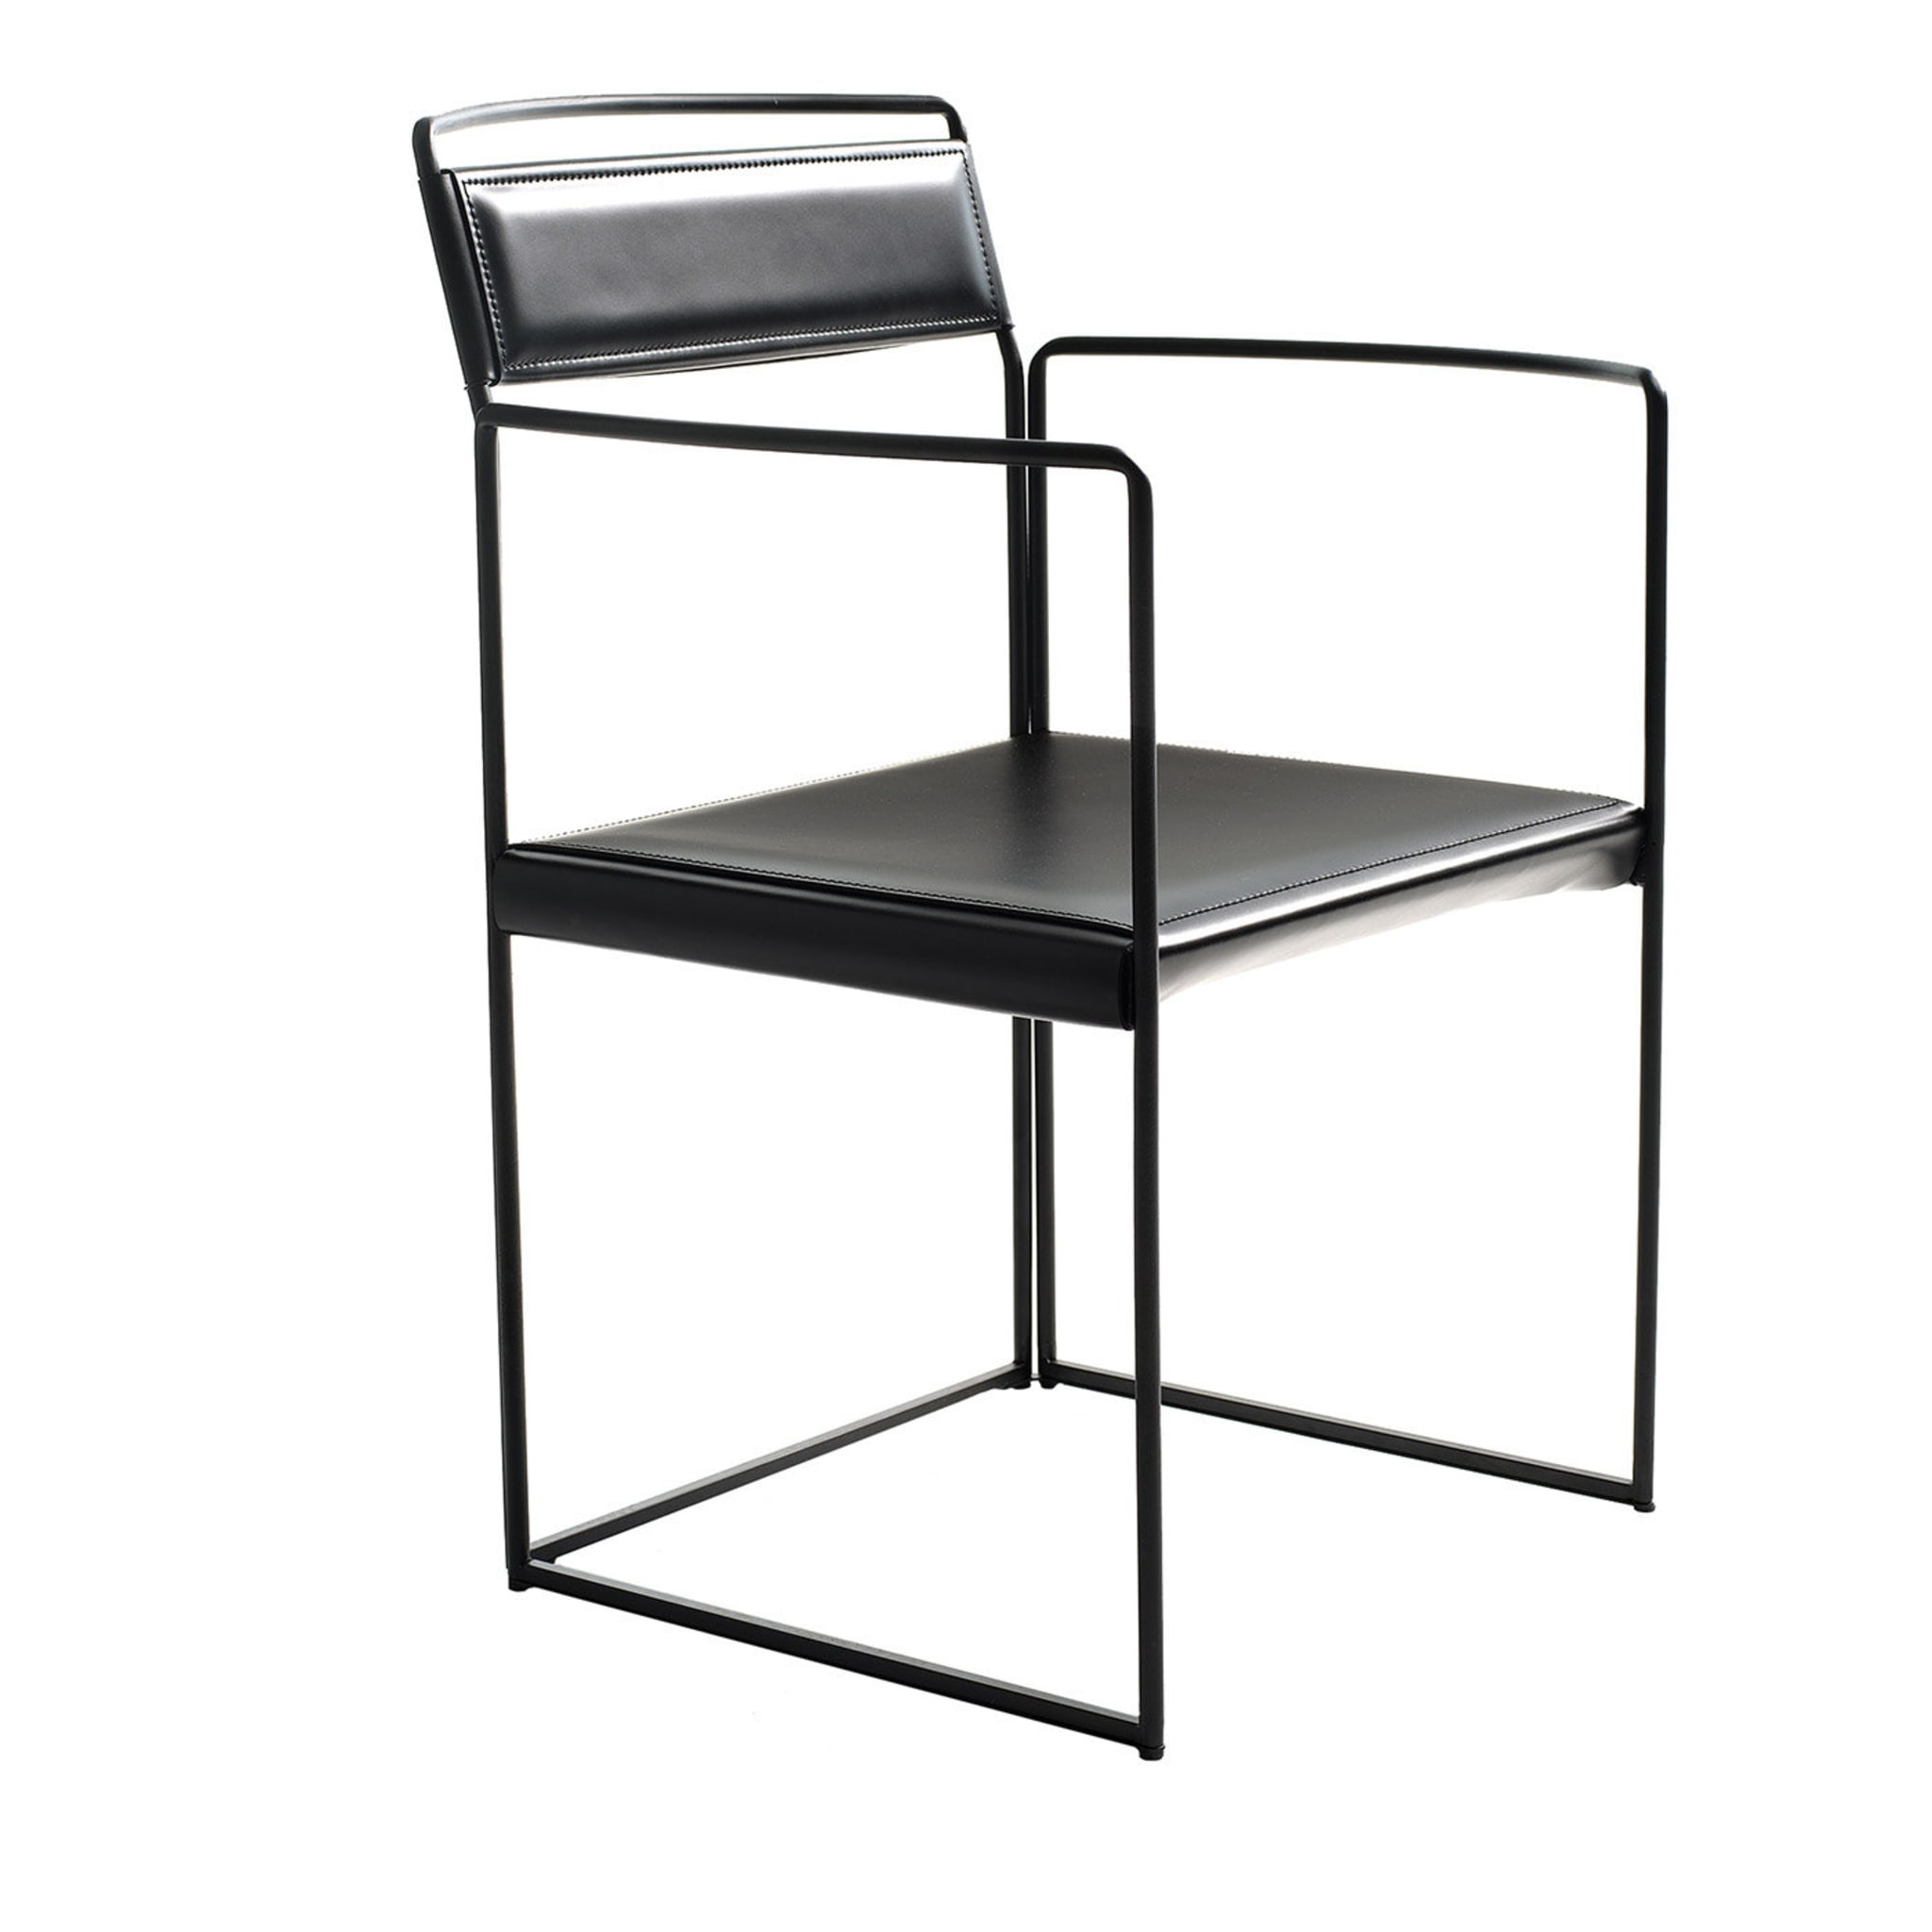 New Outline Black Chair with Armrests by Alberto Colzani - Main view